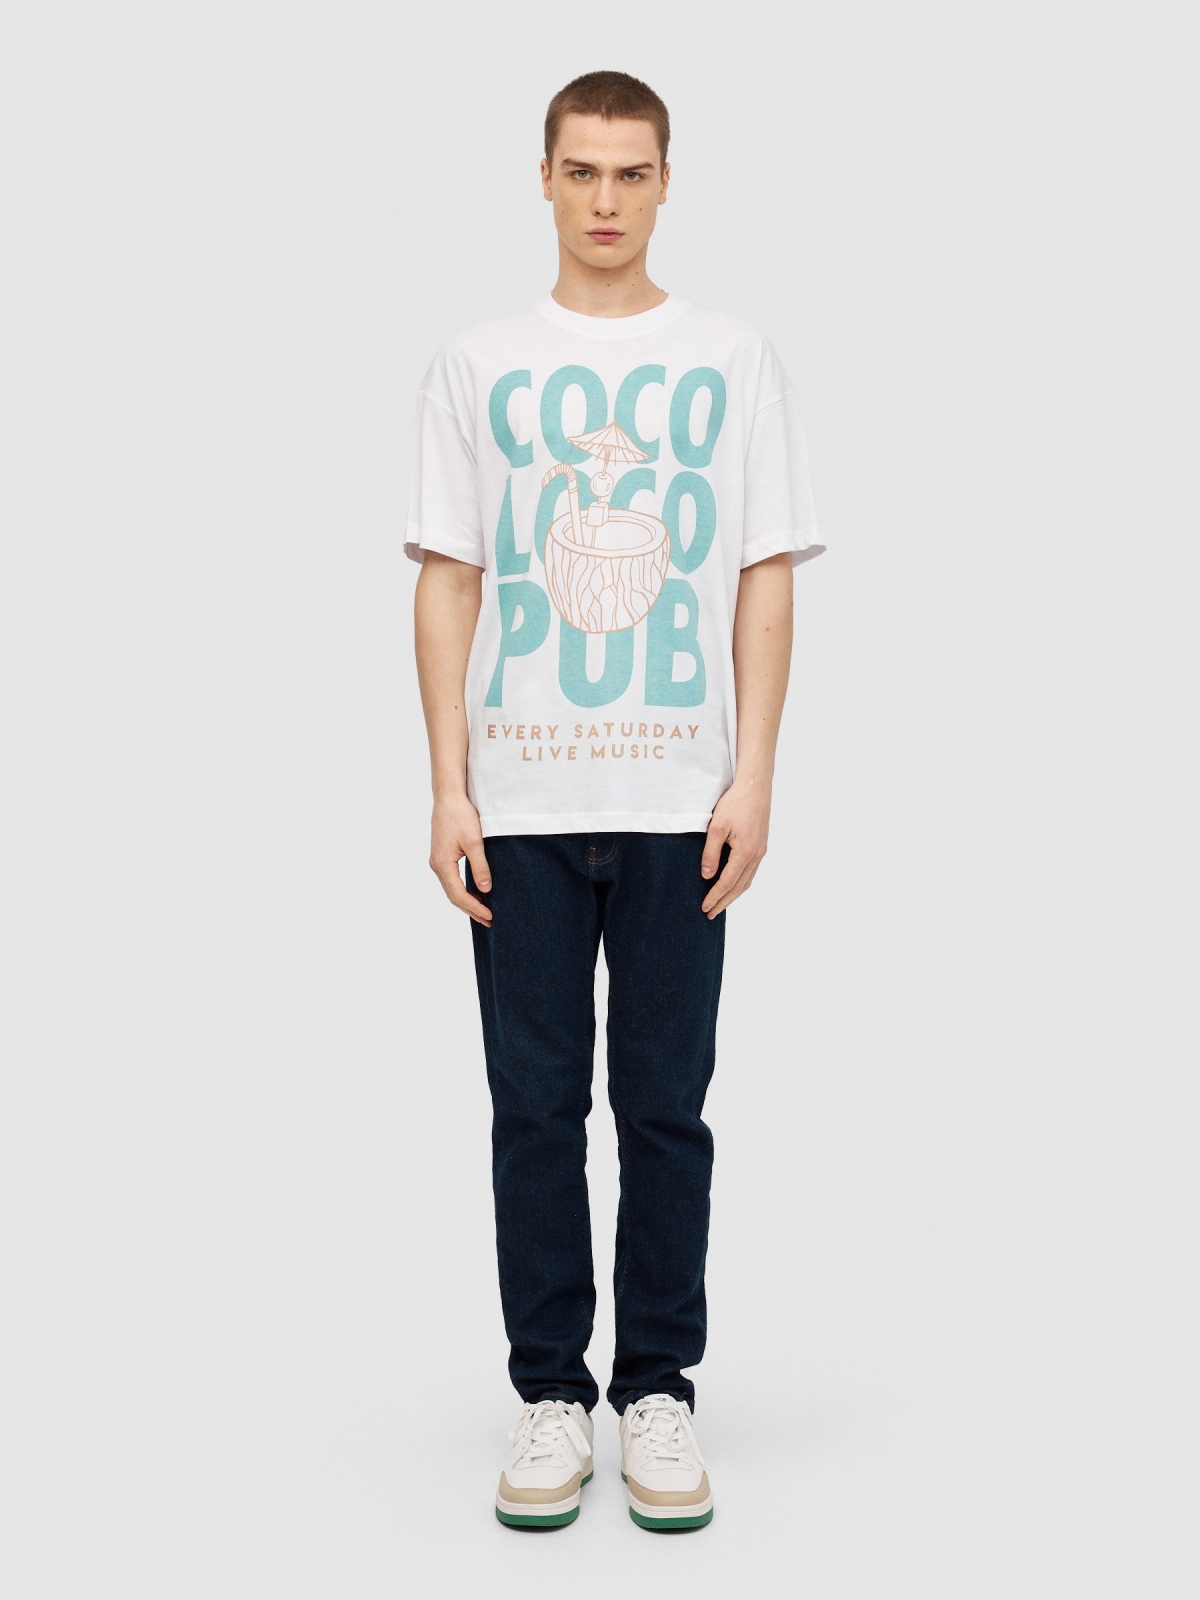 Coco Loco T-shirt white front view